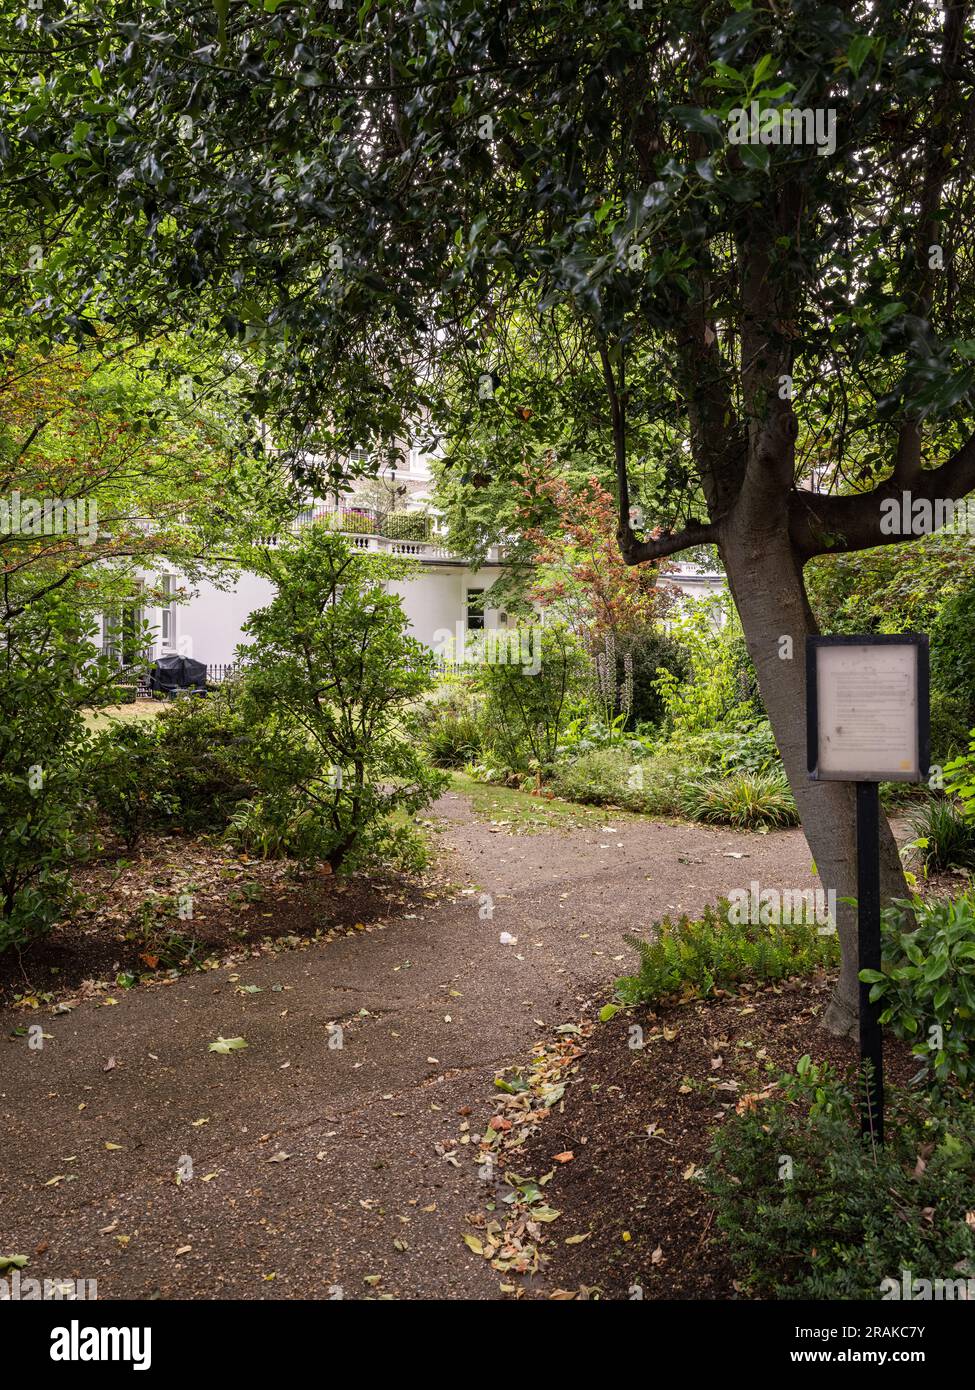 Onslow Gardens, South Kensington, London UK; a typical communal locked garden for well-off residents Stock Photo